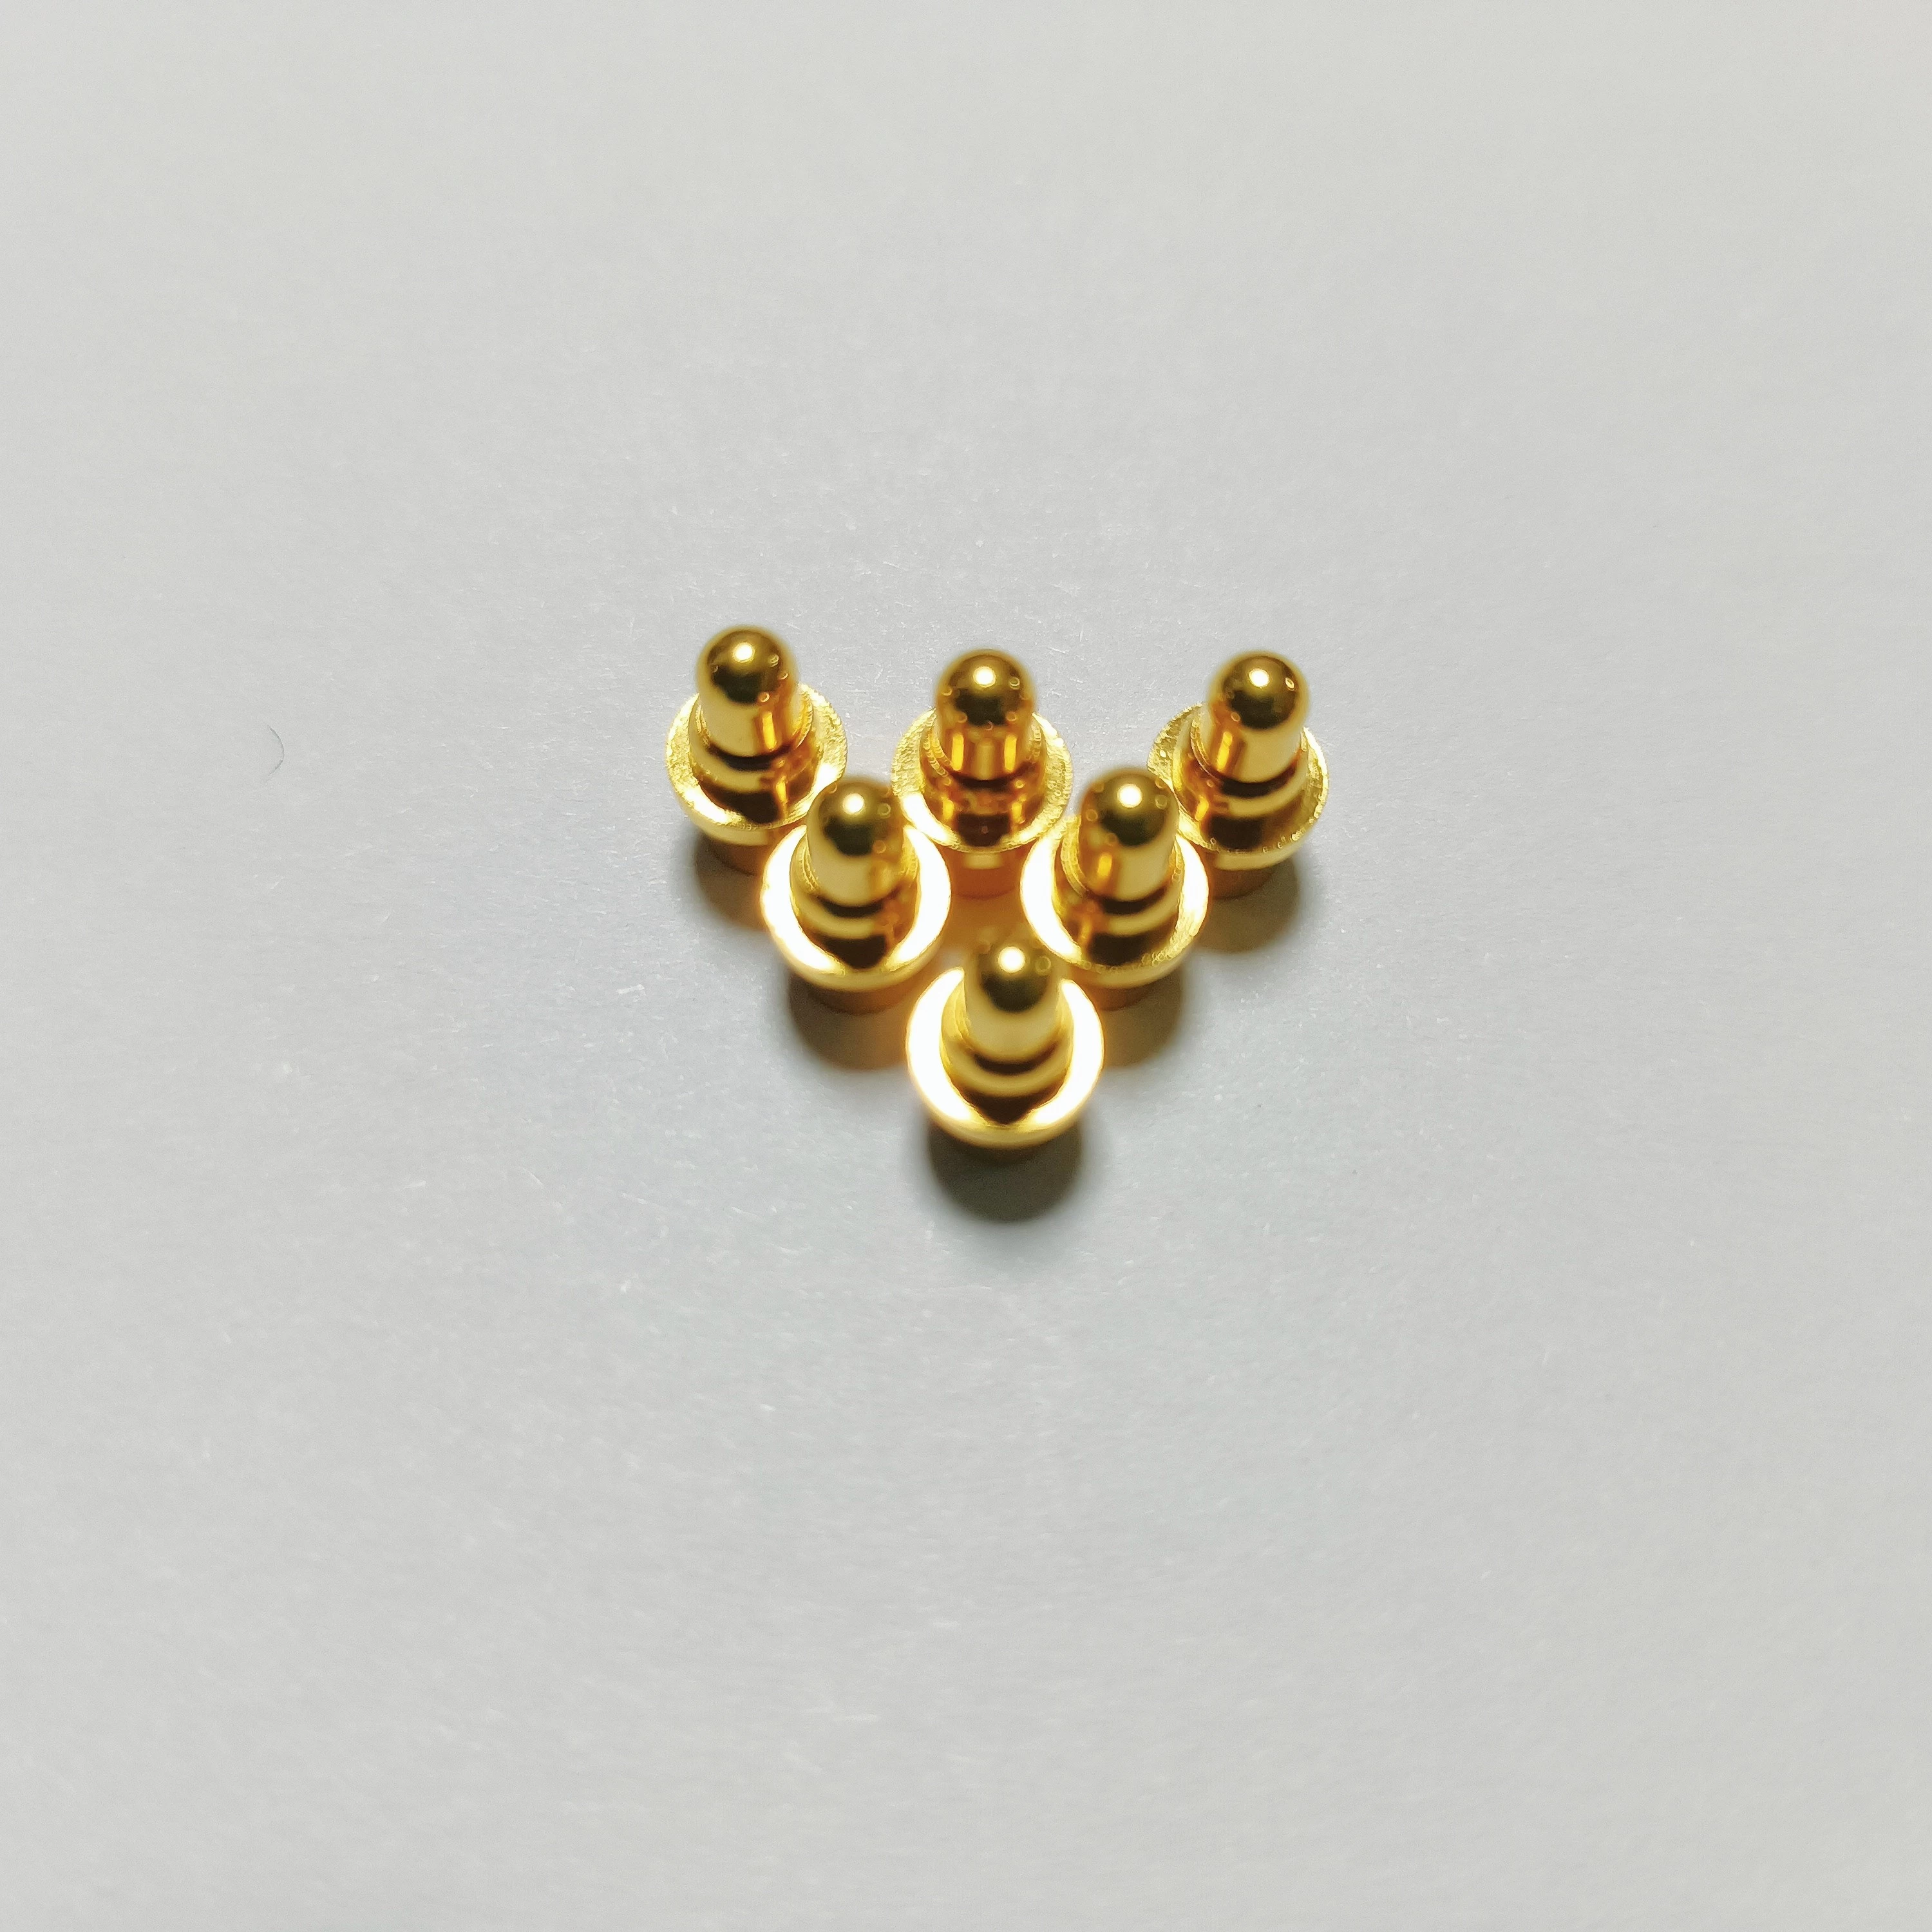 SFENG 3A Spring Loaded Pin